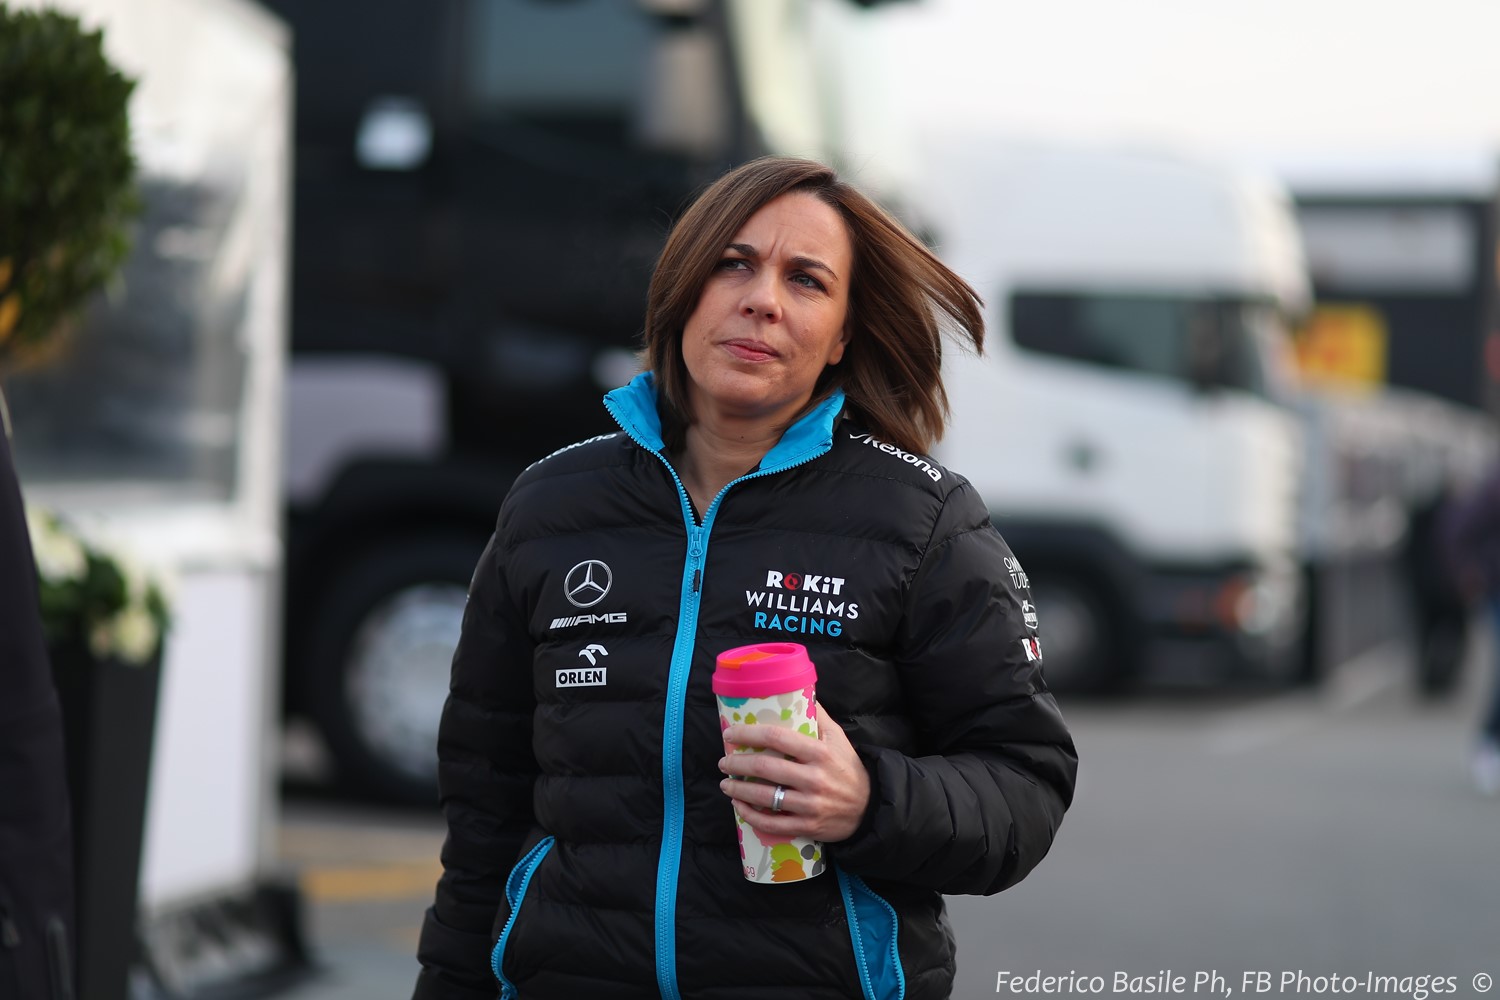 Claire Williams faced with having to sell the F1 team her father built